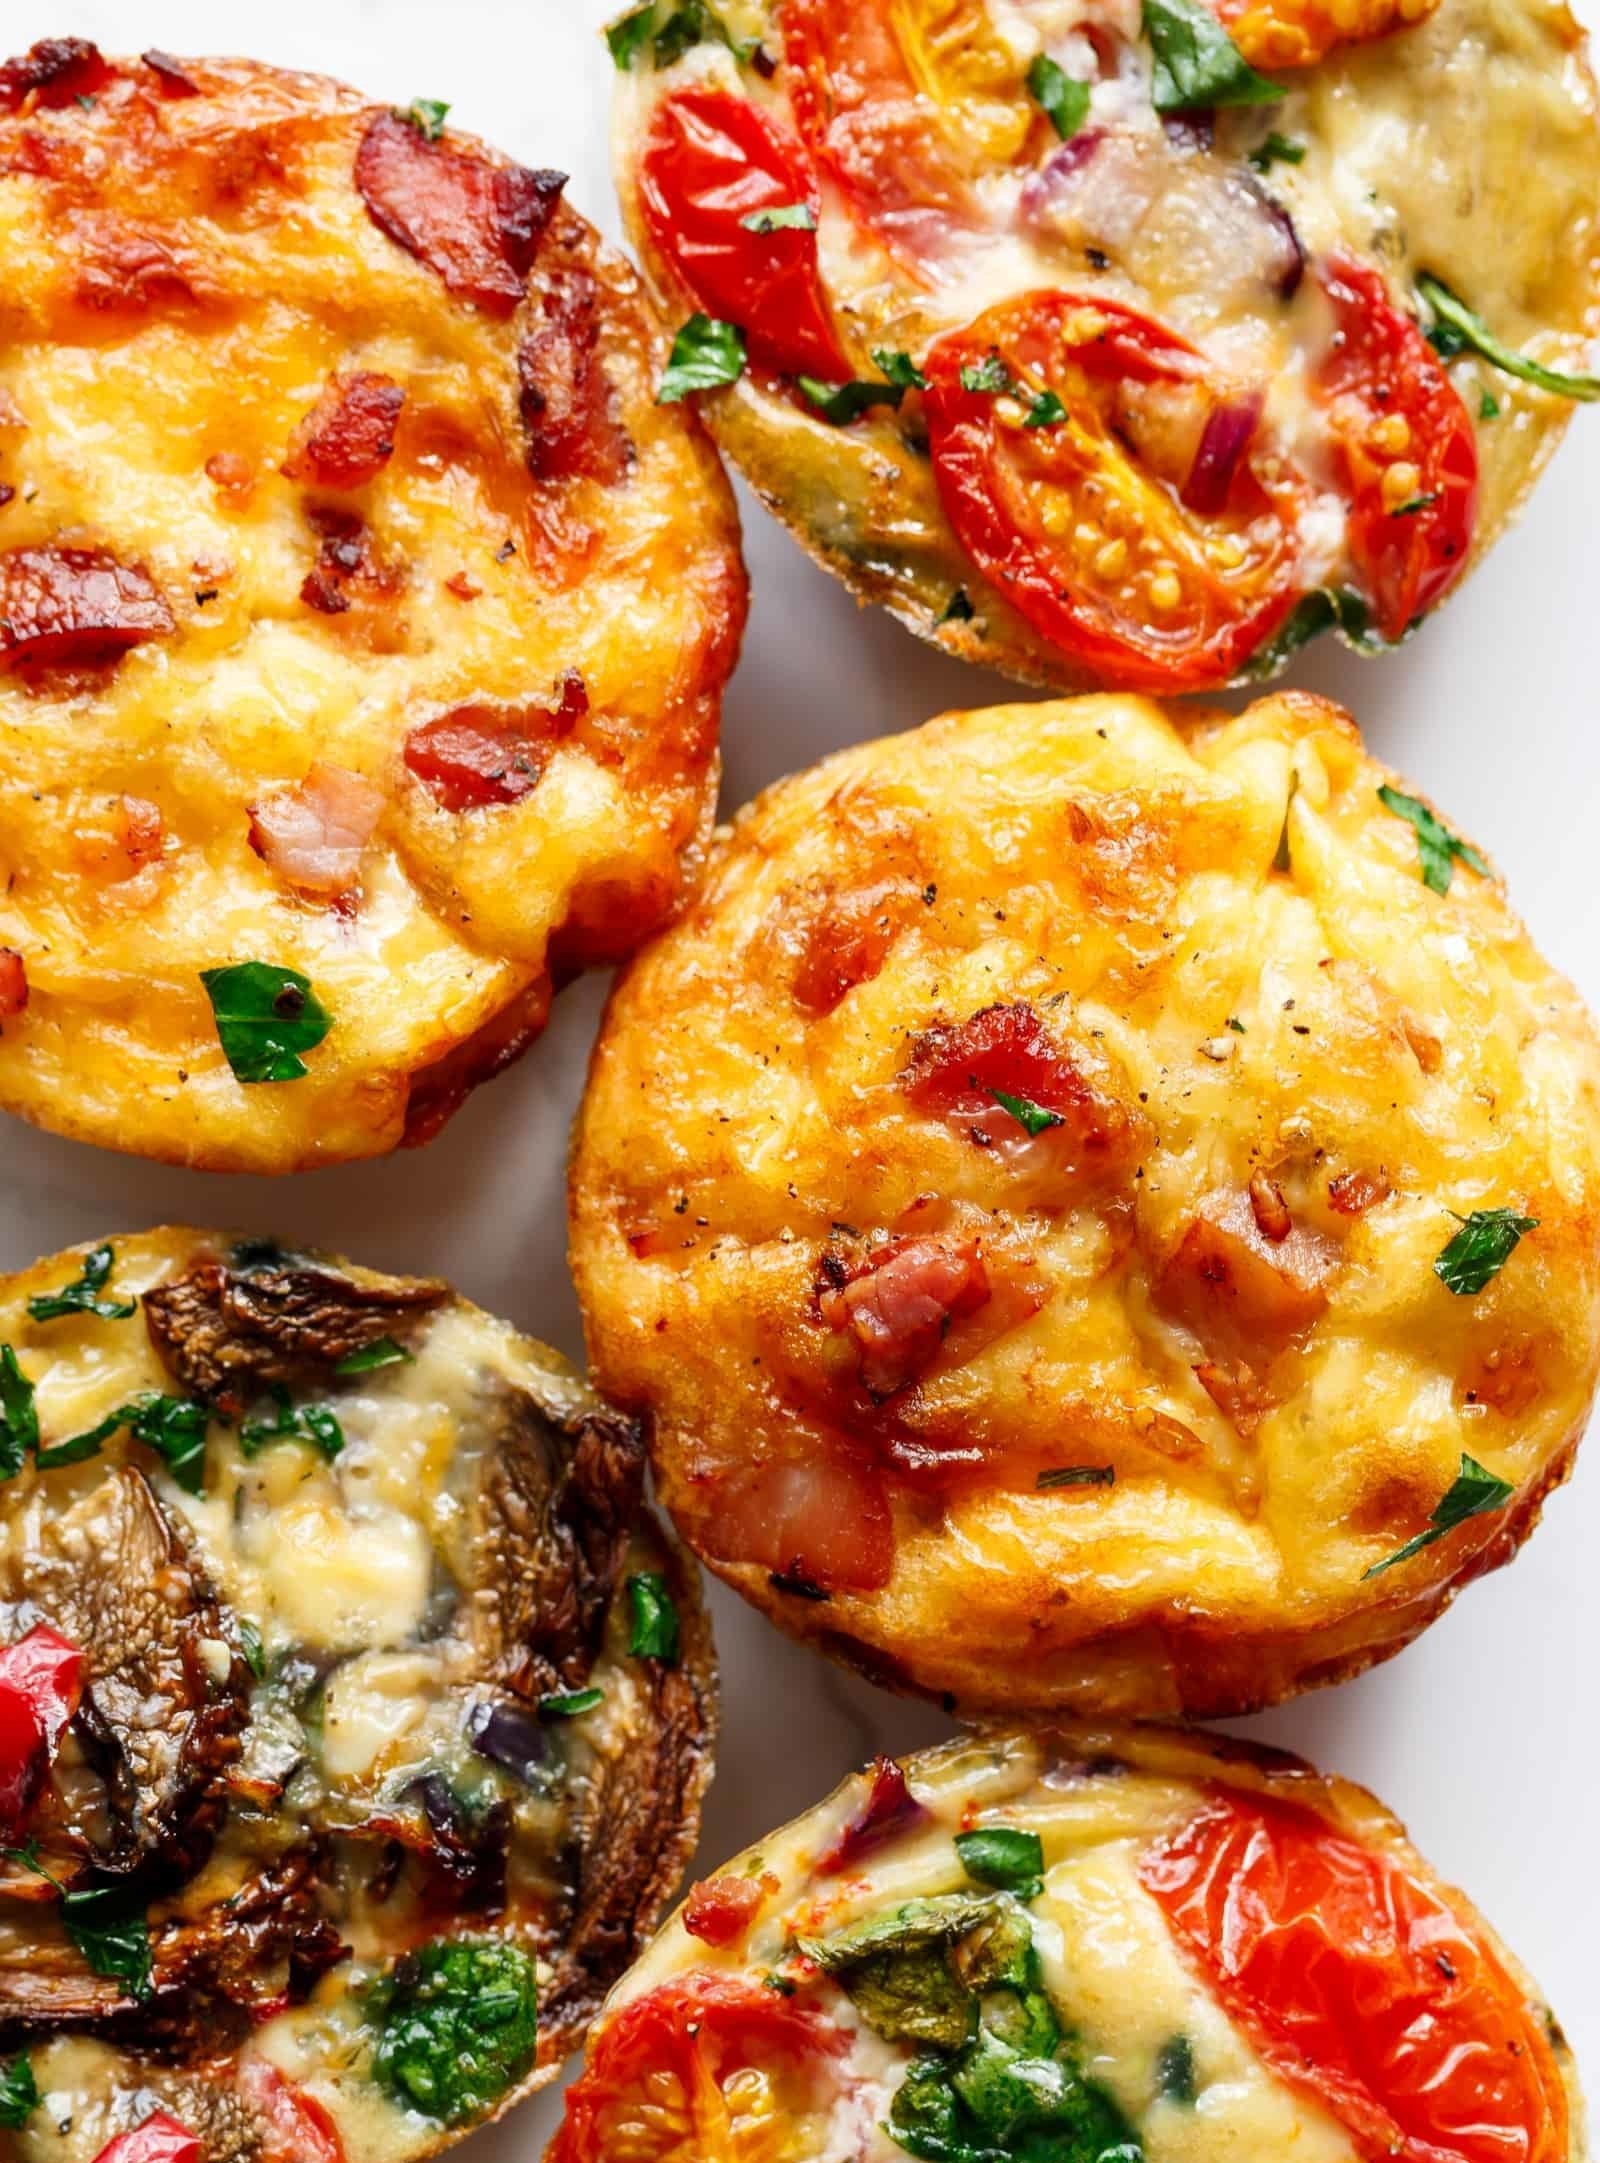 Five egg muffins filled with different veggies like tomato, spinach, mushroom, and pepper.